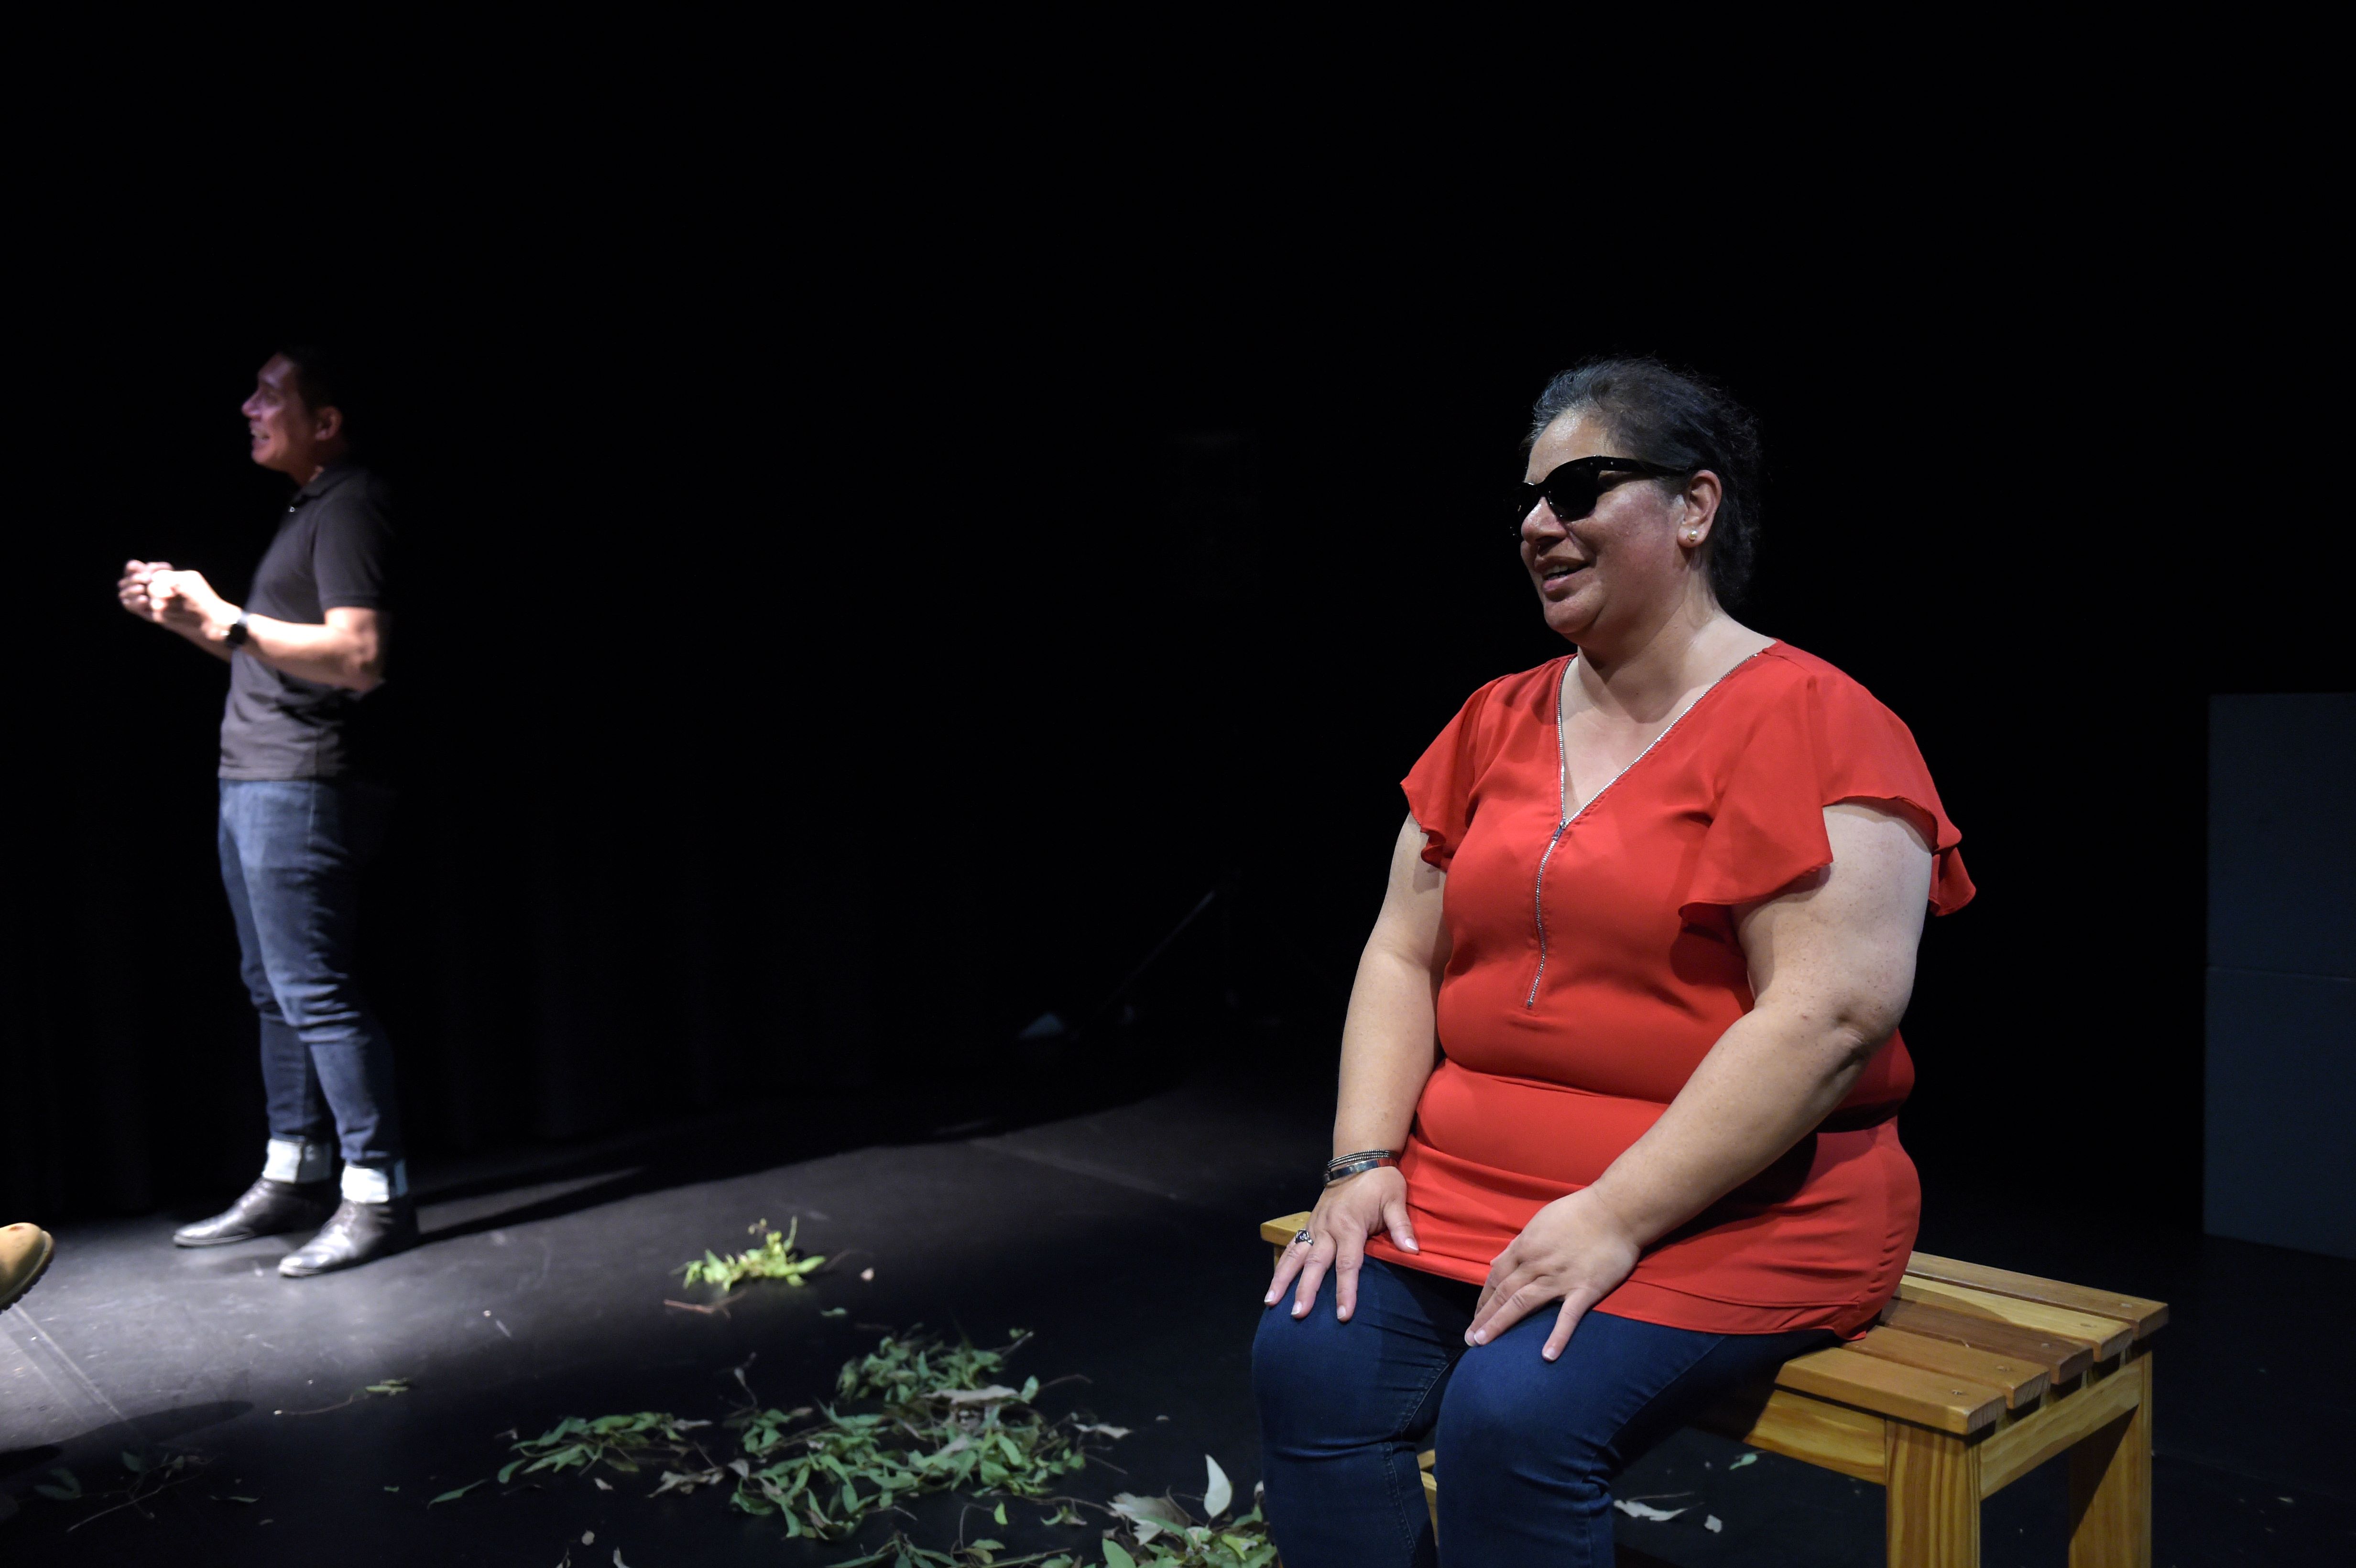 Performer Vanessa Nanai on stage seated at the wooden bench she made, smiling, wearing fire engine red top, blue jeans, and sunglasses, both palms resting on her knees. To her left standing is Auslan interpreter Marc Ethan in bright light signing, and on floor eucalyptus are strewn. From Arts House and VV's CultureLab project Disrupting sighted ableism. Photo by Carla Gottgens.